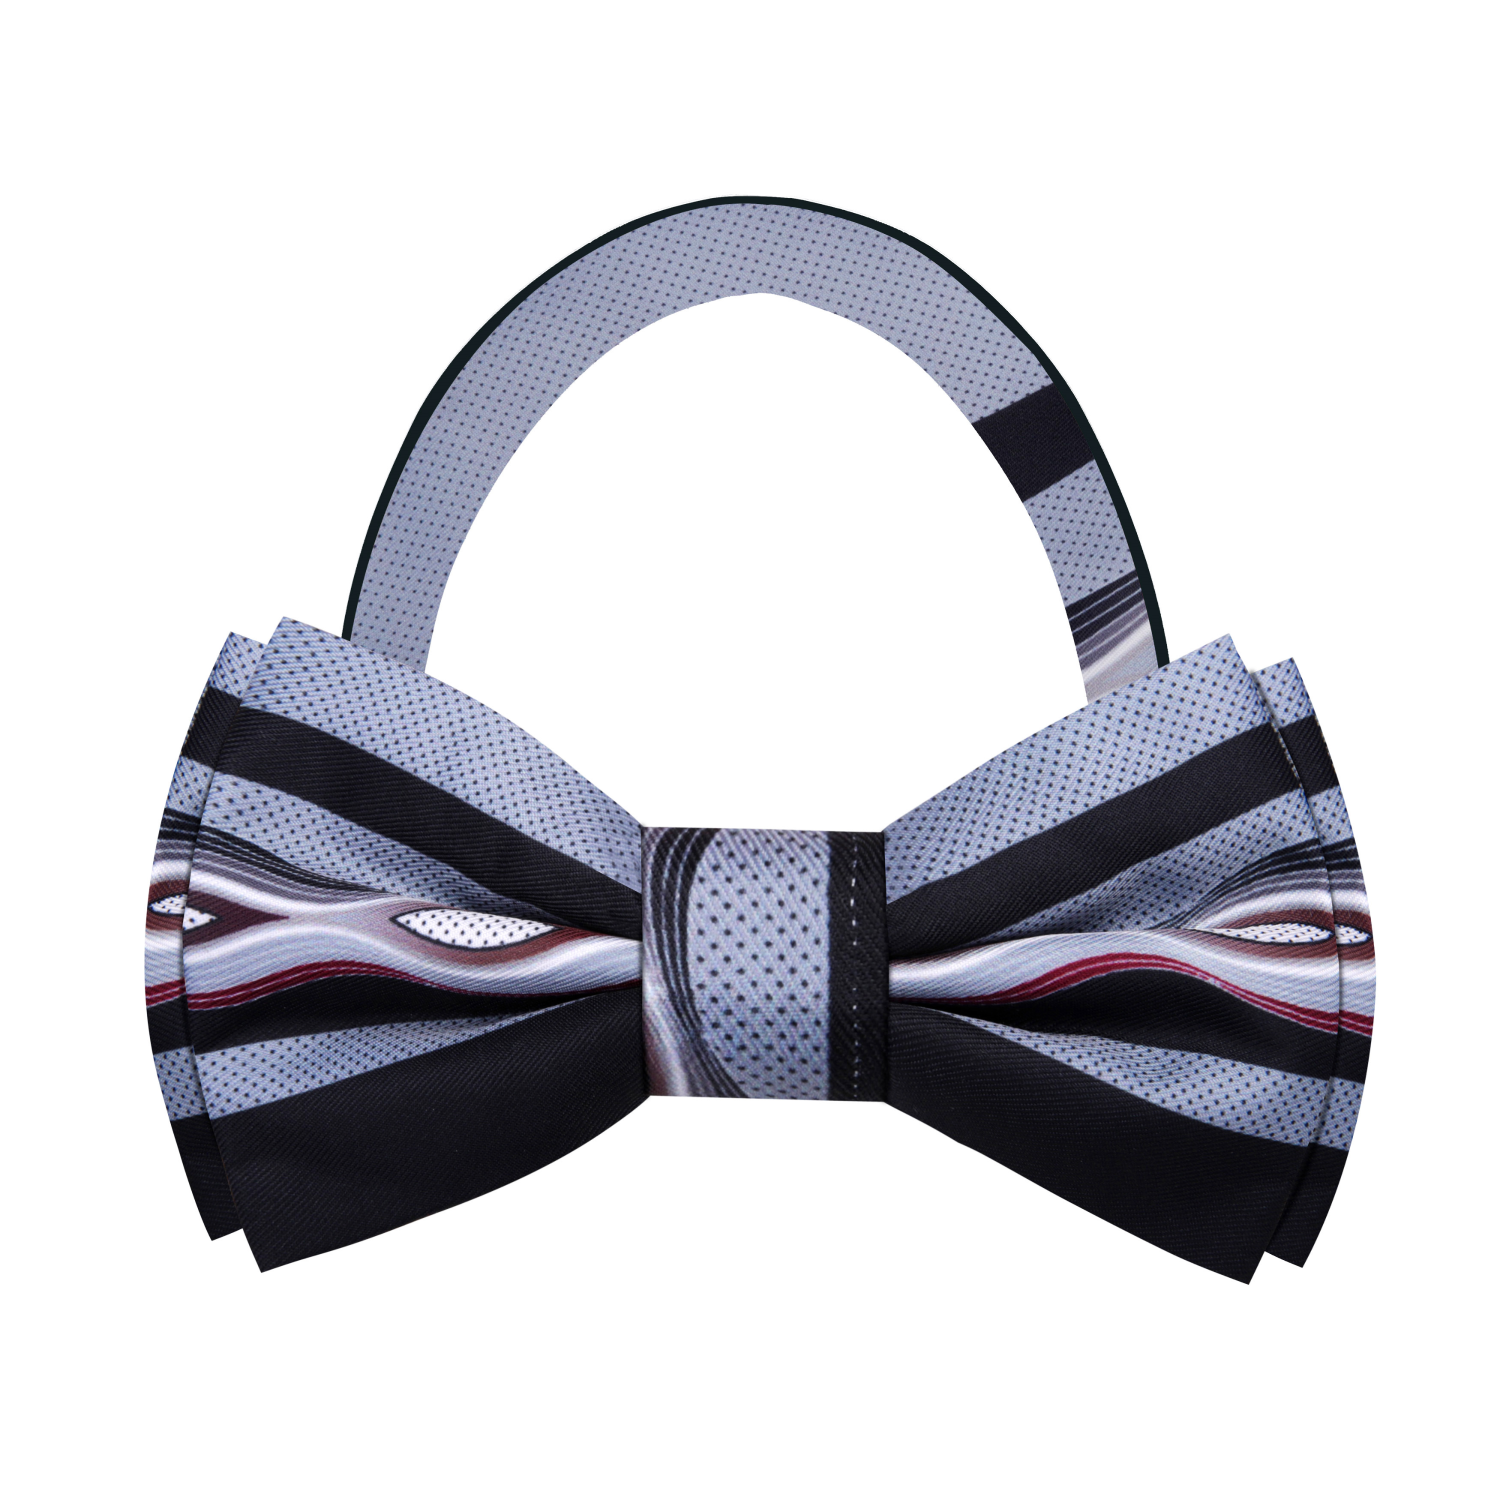 Fog Grey, Black, Deep Red Abstract Bow Tie Pre Tied